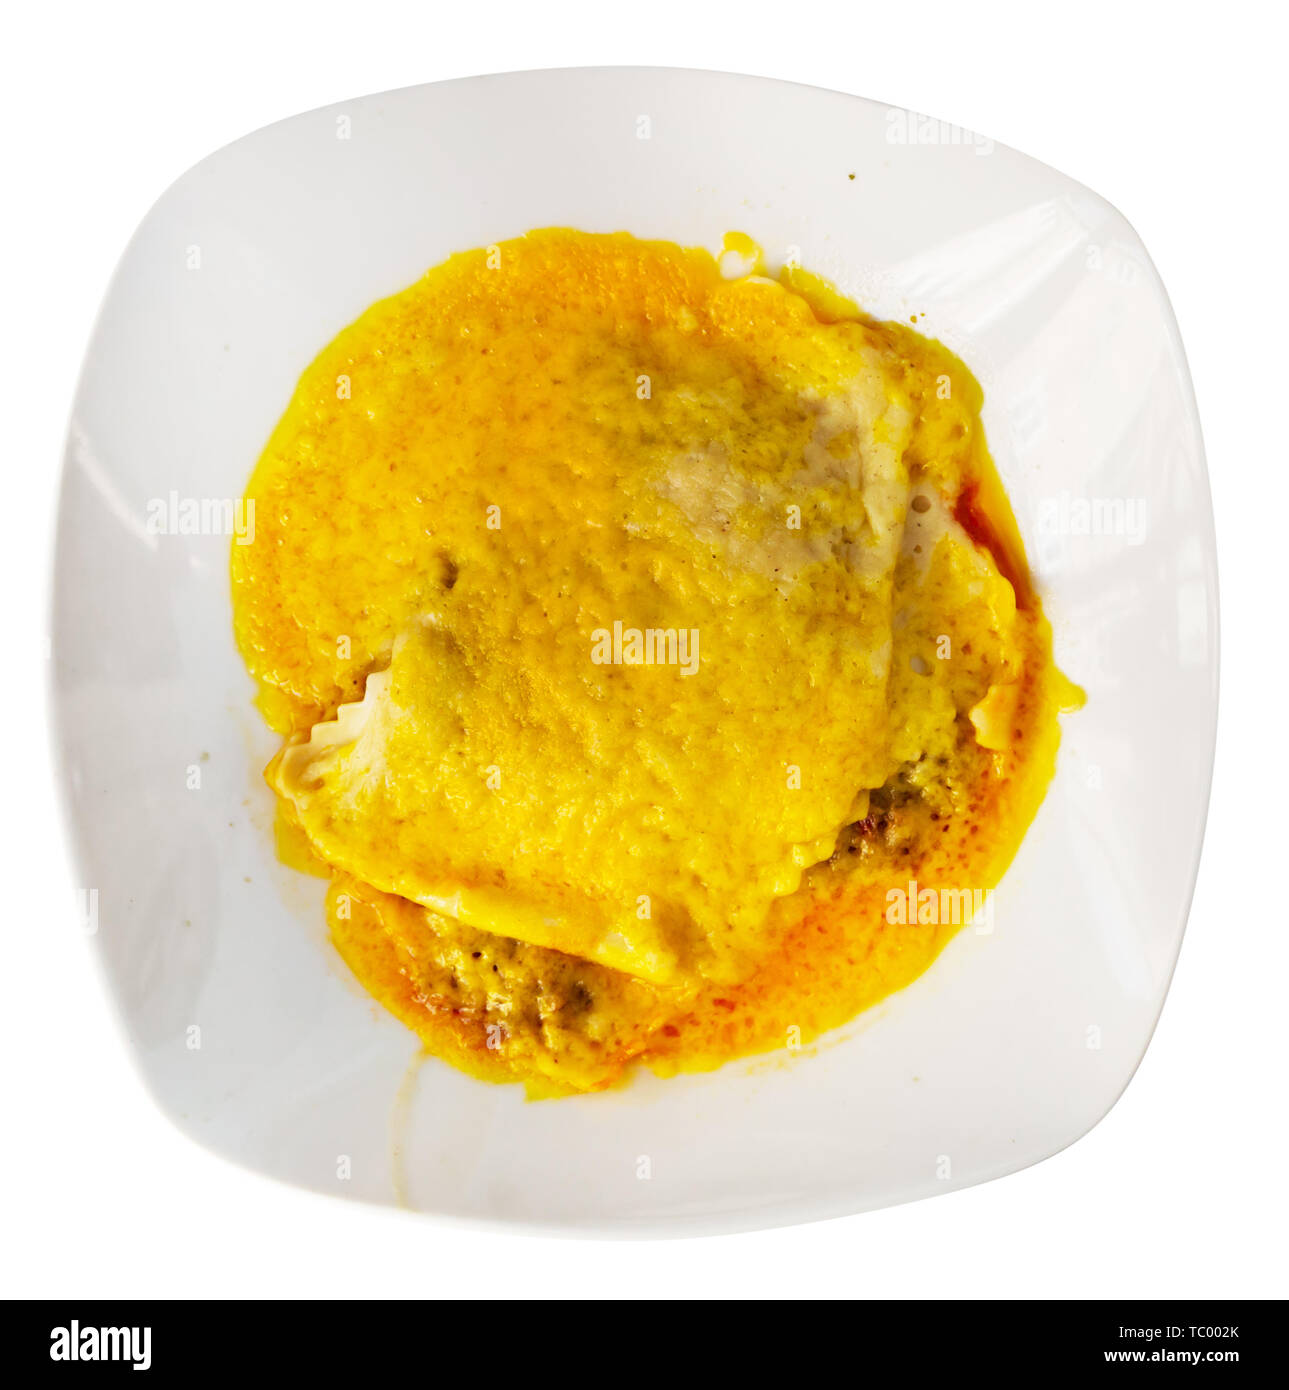 Top view of slice of traditional meat lasagna with bechamel sauce topped with grated cheese served on white plate. Isolated over white background Stock Photo